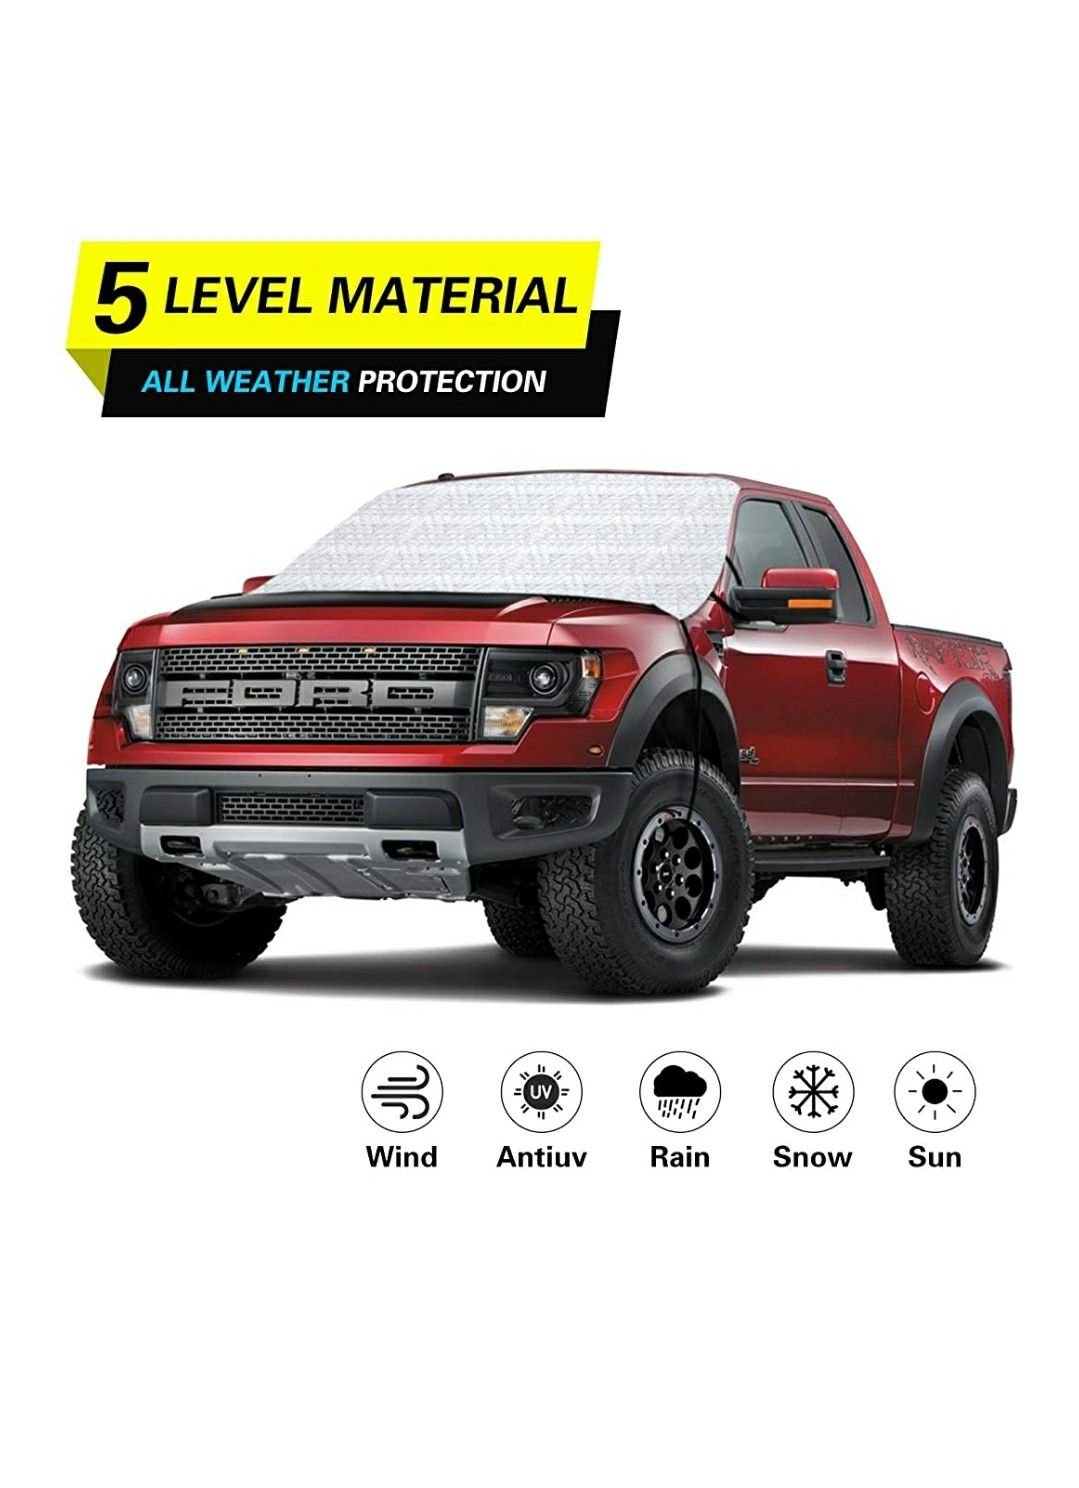 GreatParagon Car Windshield Snow Cover Sunshade, Waterproof,5-Layer Protection Snow, Ice, Frost,UV Full Defense, Fits Most Car